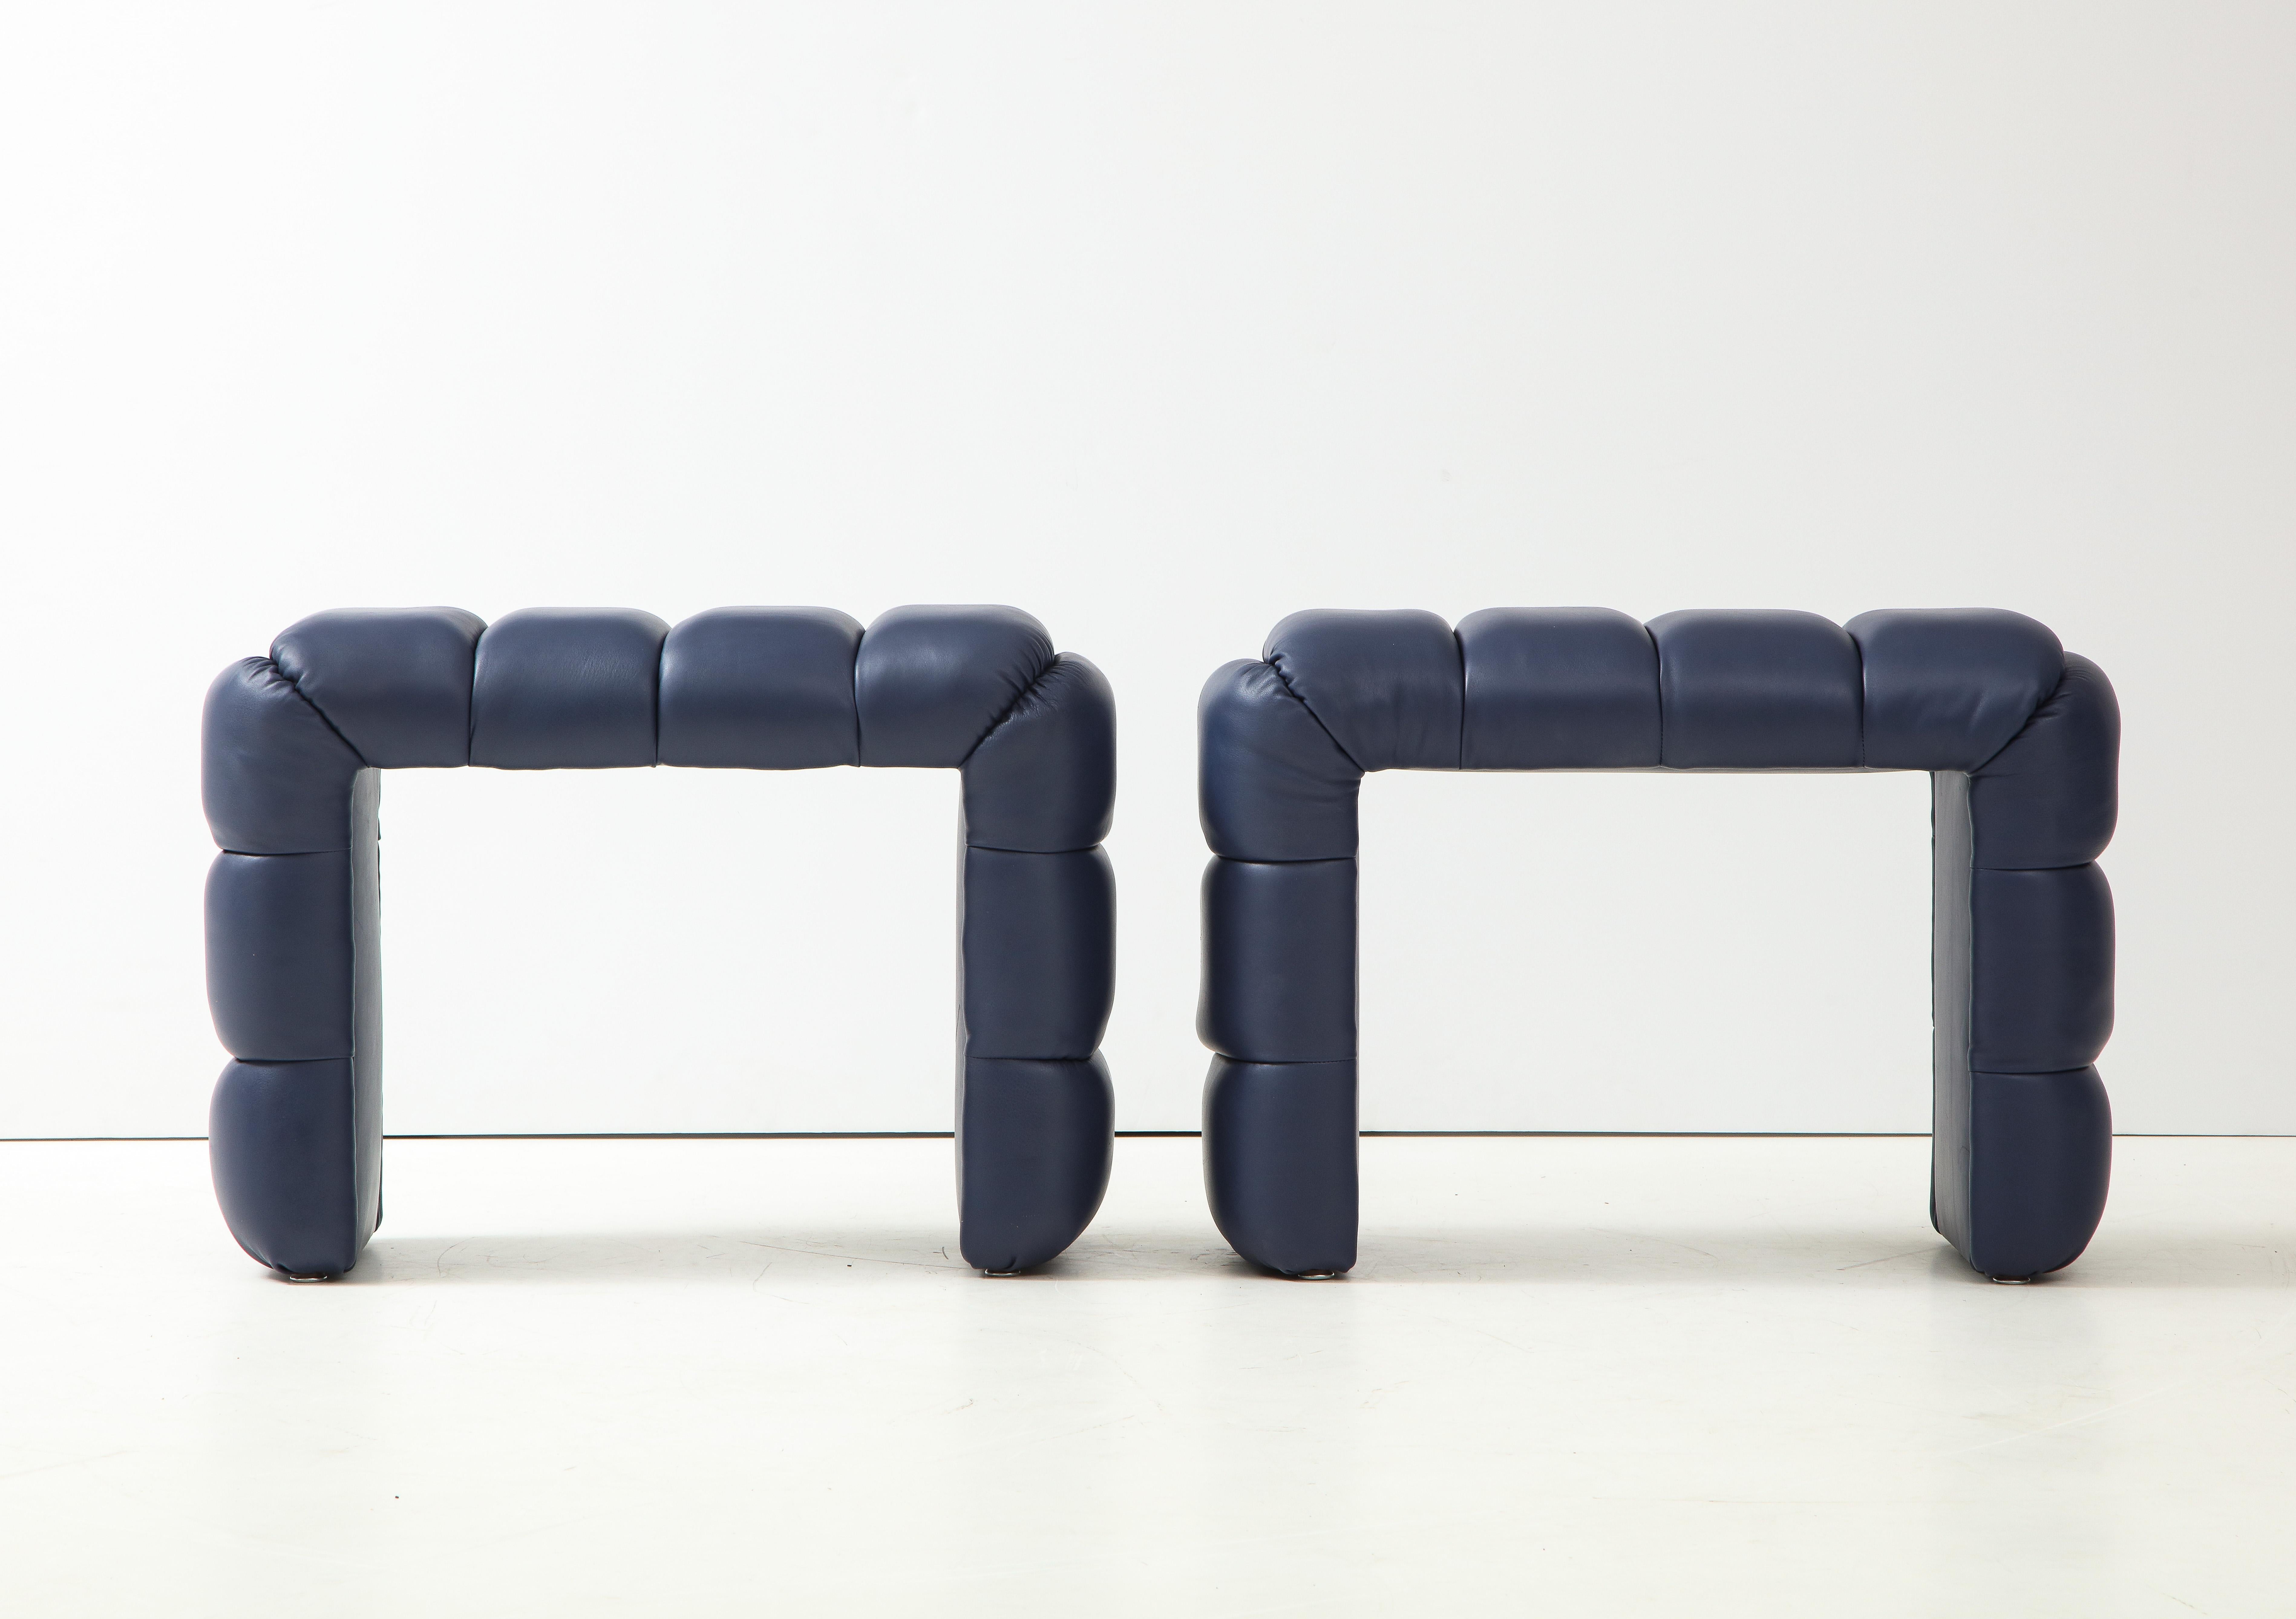 Custom made channel tufted blue soft leather cascade stool or bench, handcrafted in Florence, Italy by an artisan carpenter. One of a kind. Soft Italian leather in a sophisticated deep blue color. Clean lines.  This listing is for a single bench as